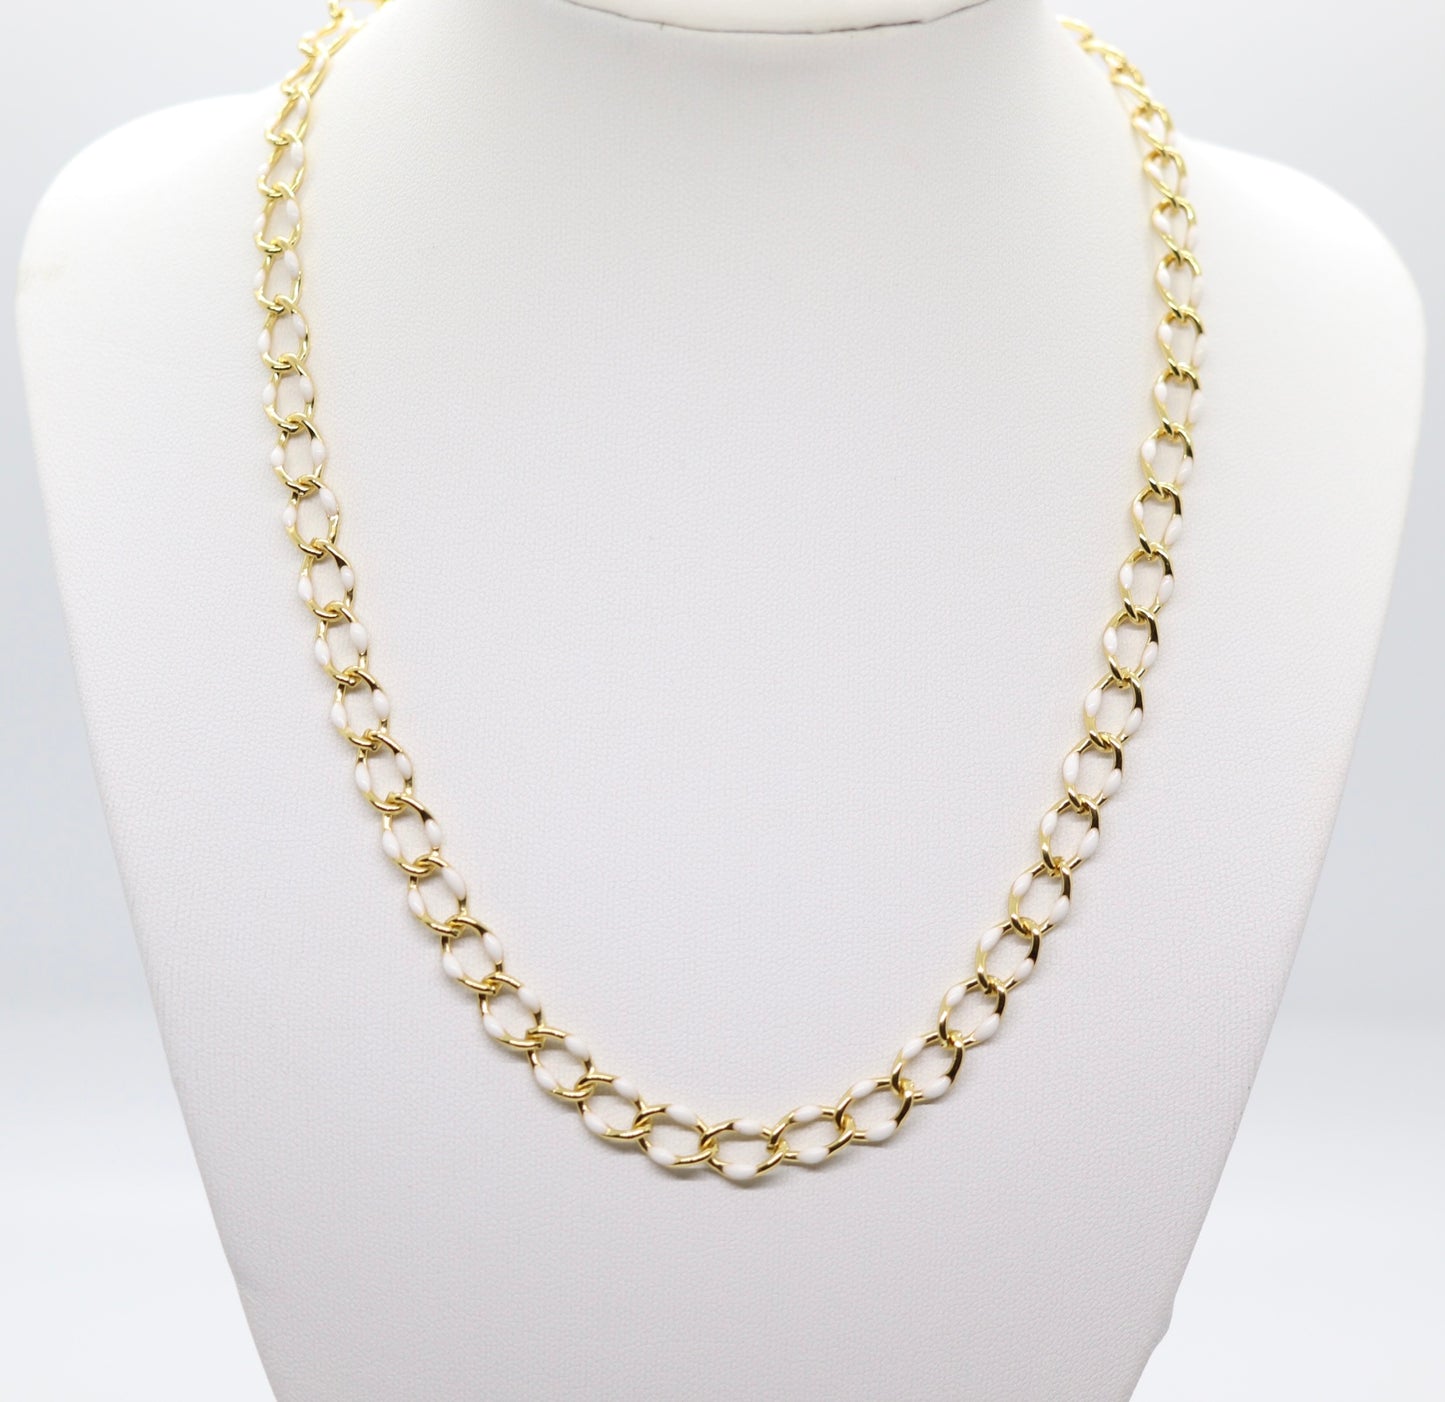 White Chain Link Necklace